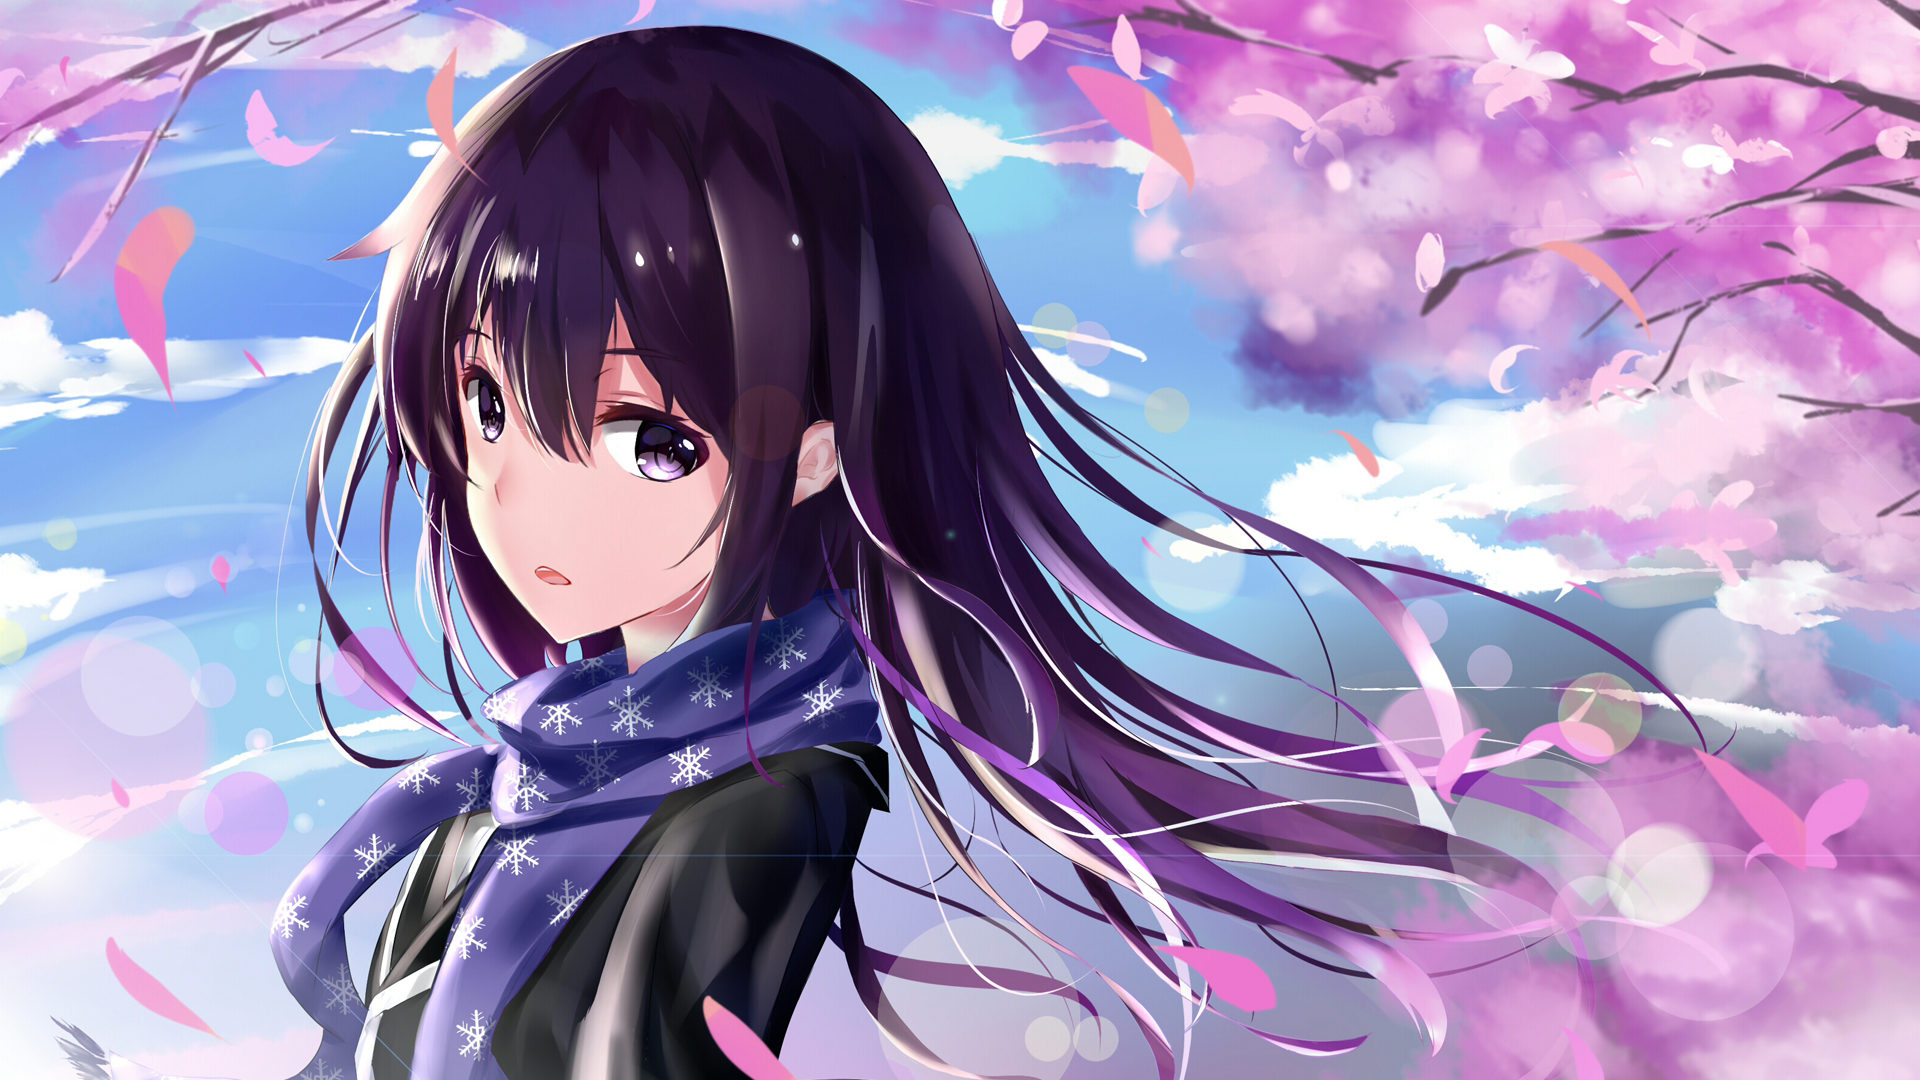 Anime Girl With Purple Hair Wallpapers